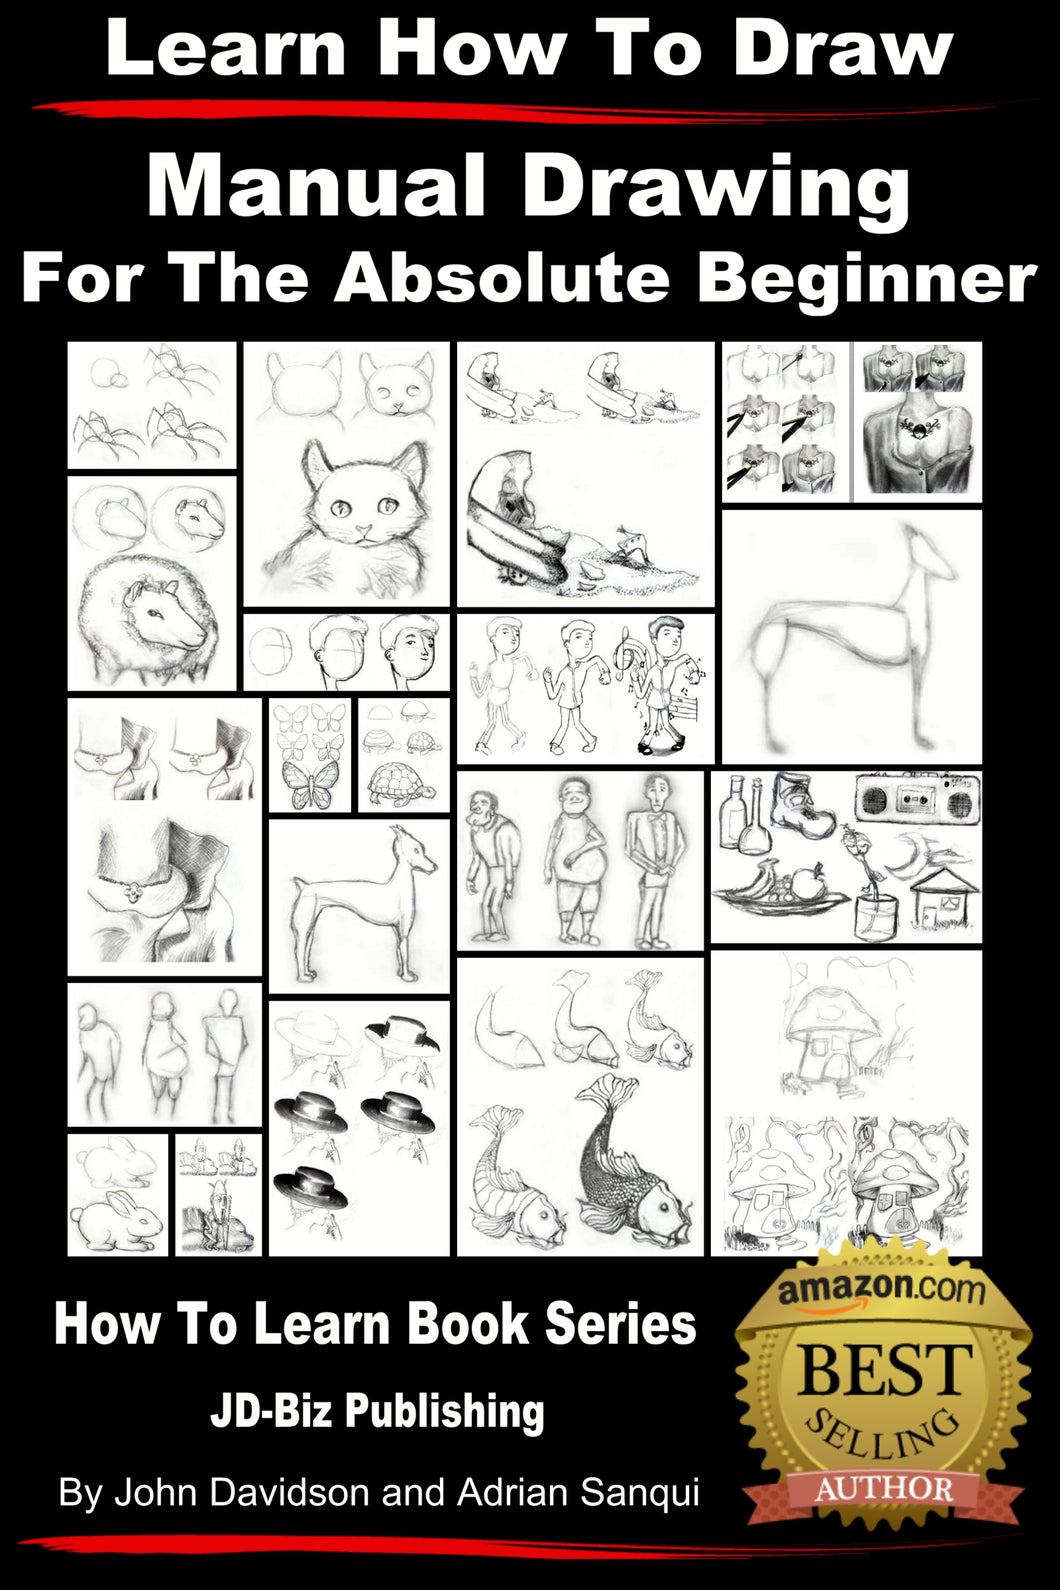 Learn How to Draw - Manual Drawing For the Absolute Beginner